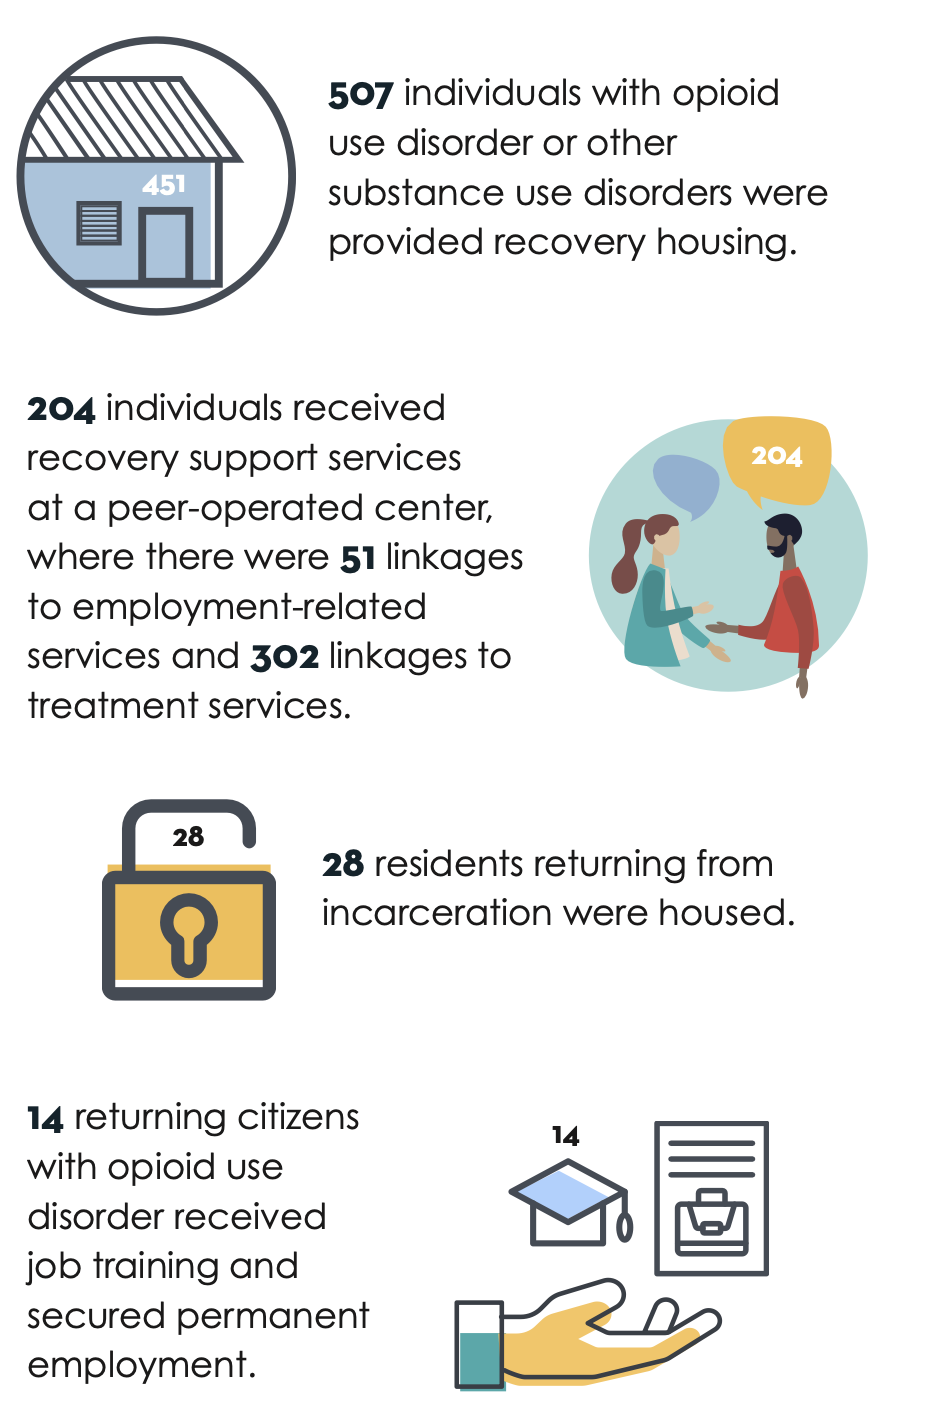 507 individuals with opioid use disorder or other substance use disorders were provided recovery housing. 204 individuals received recovery support services 204 at a peer-operated center, where there were 51 linkages to employment-related services and 302 linkages to treatment services. 28 residents returning from incarceration were housed.